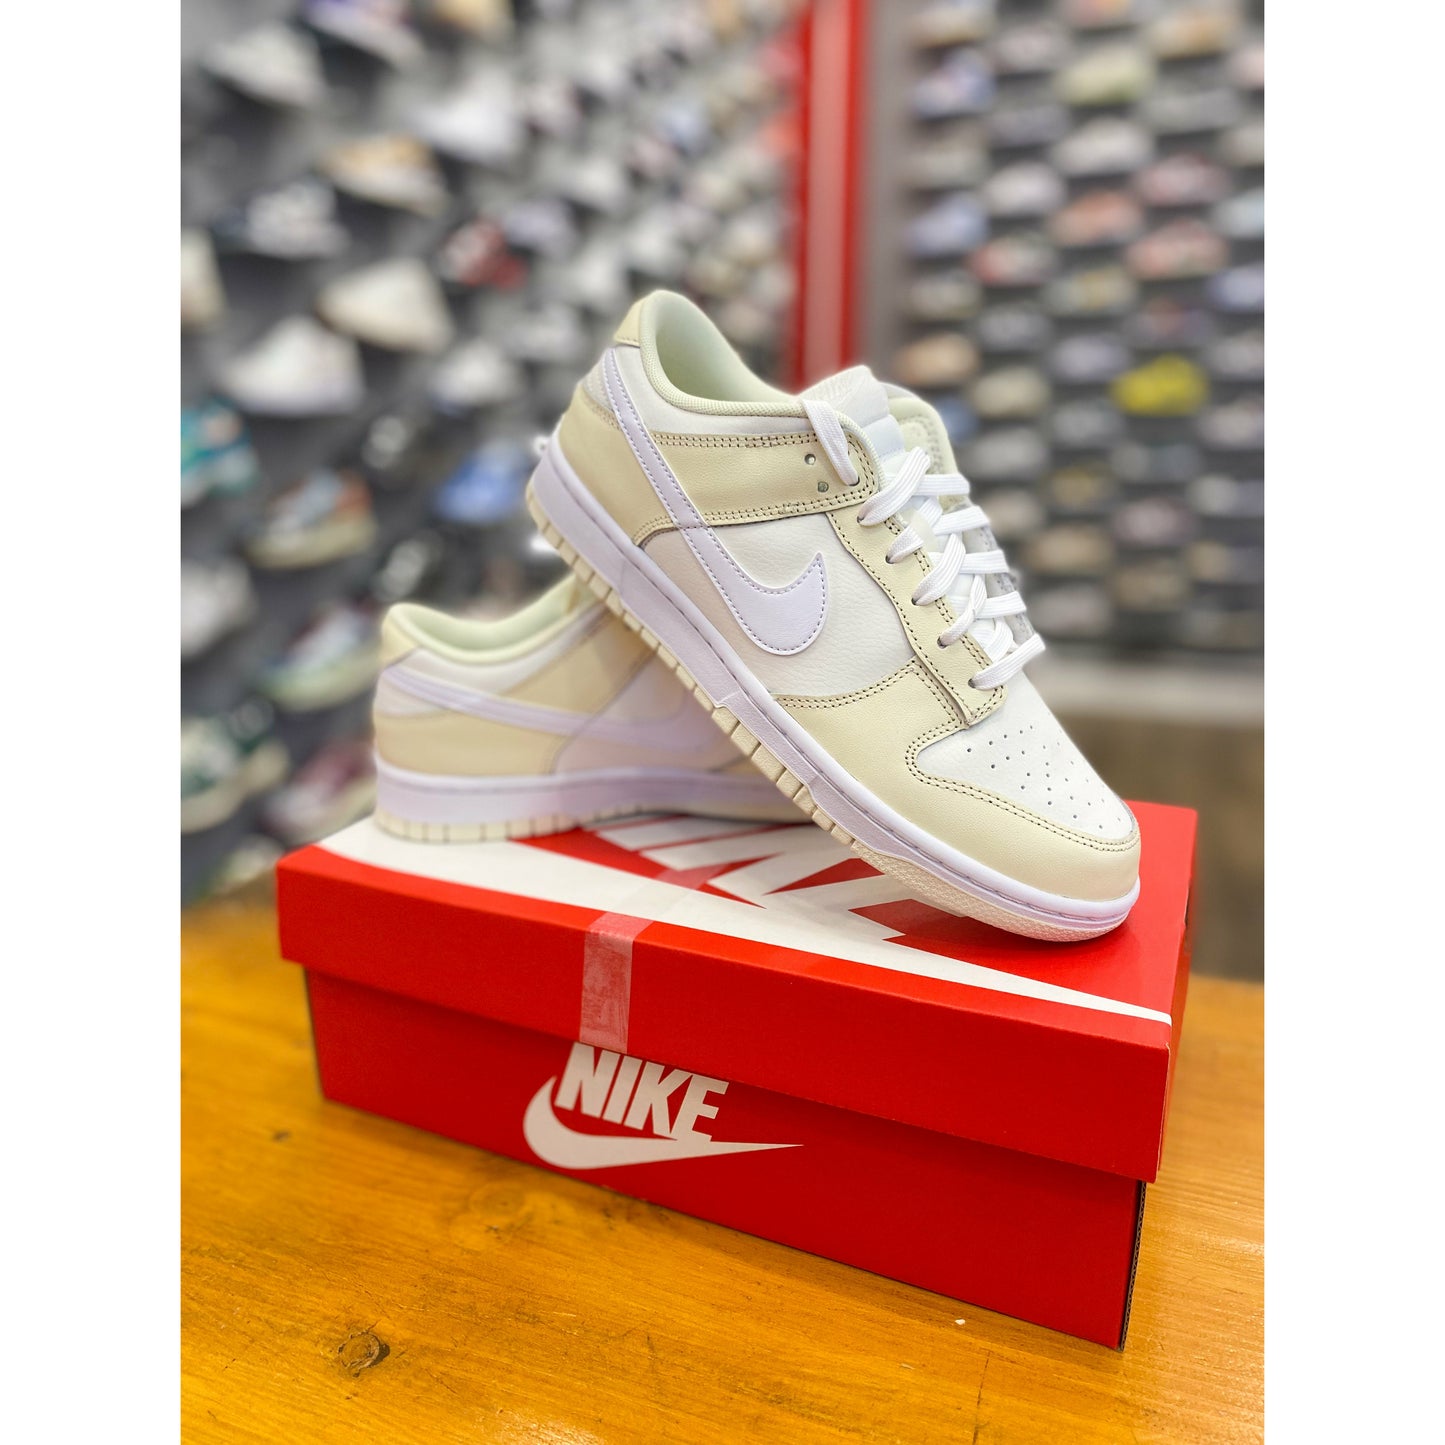 Nike Dunk Low Coconut Milk from Nike